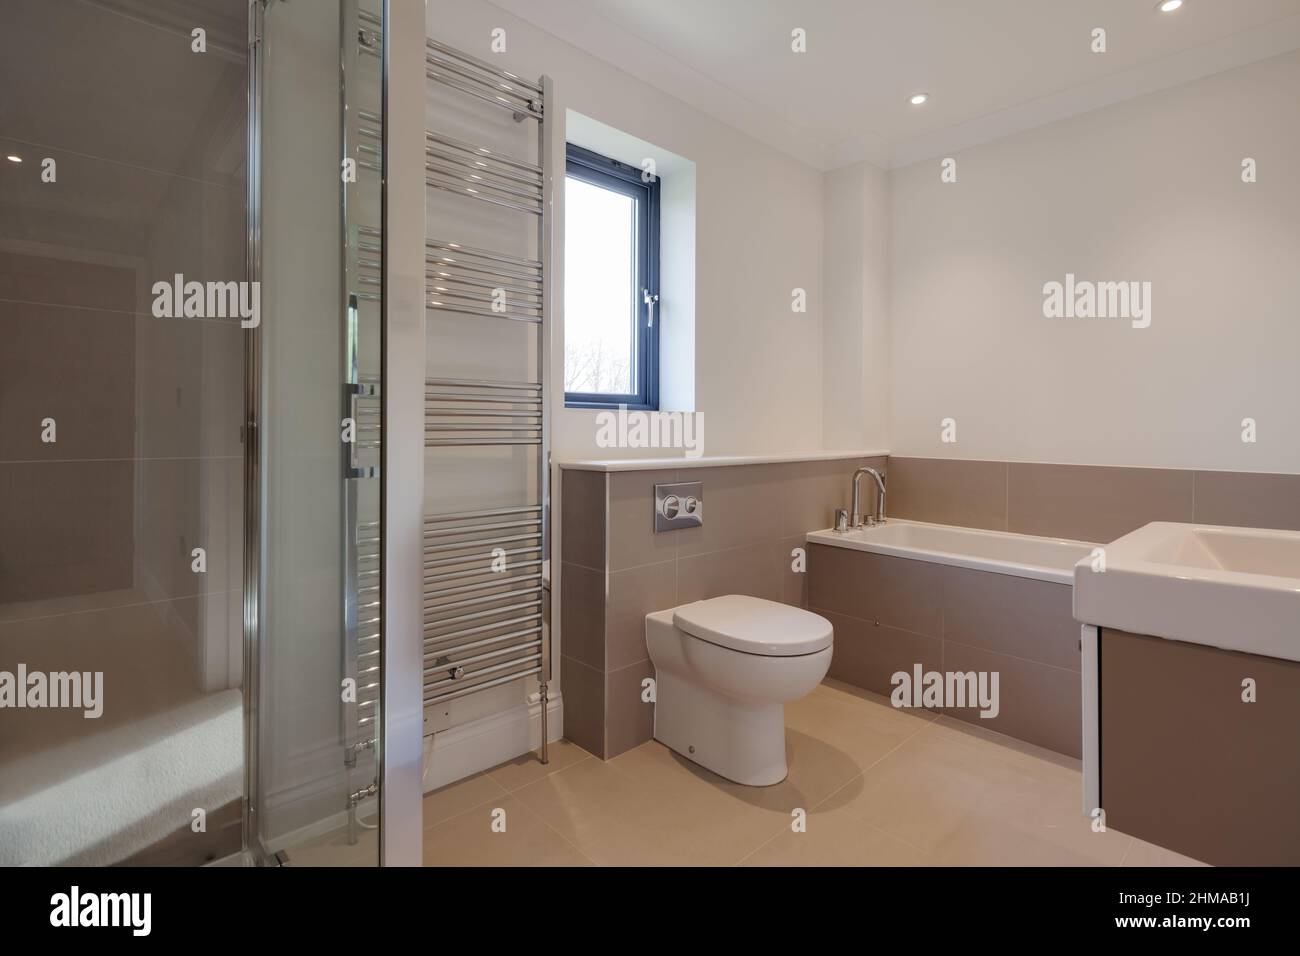 Great Wilbraham, Cambridgeshire, England - Feb 24 2017: Brand new luxury shower bathroom within vacant just finished property with cubicle  bath tub a Stock Photo